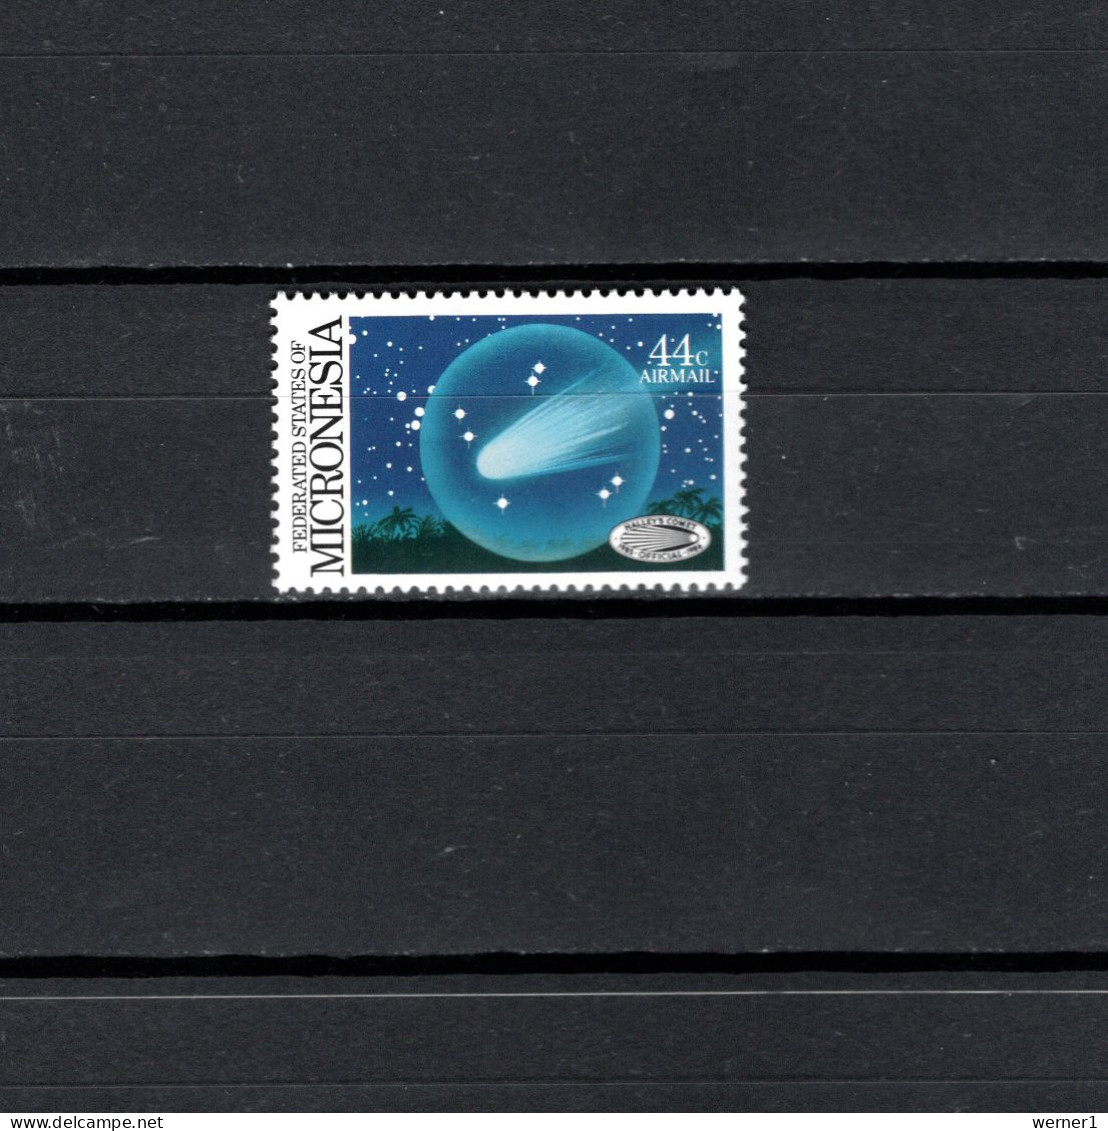 Micronesia 1986 Space, Halley's Comet Stamp MNH - Oceanië